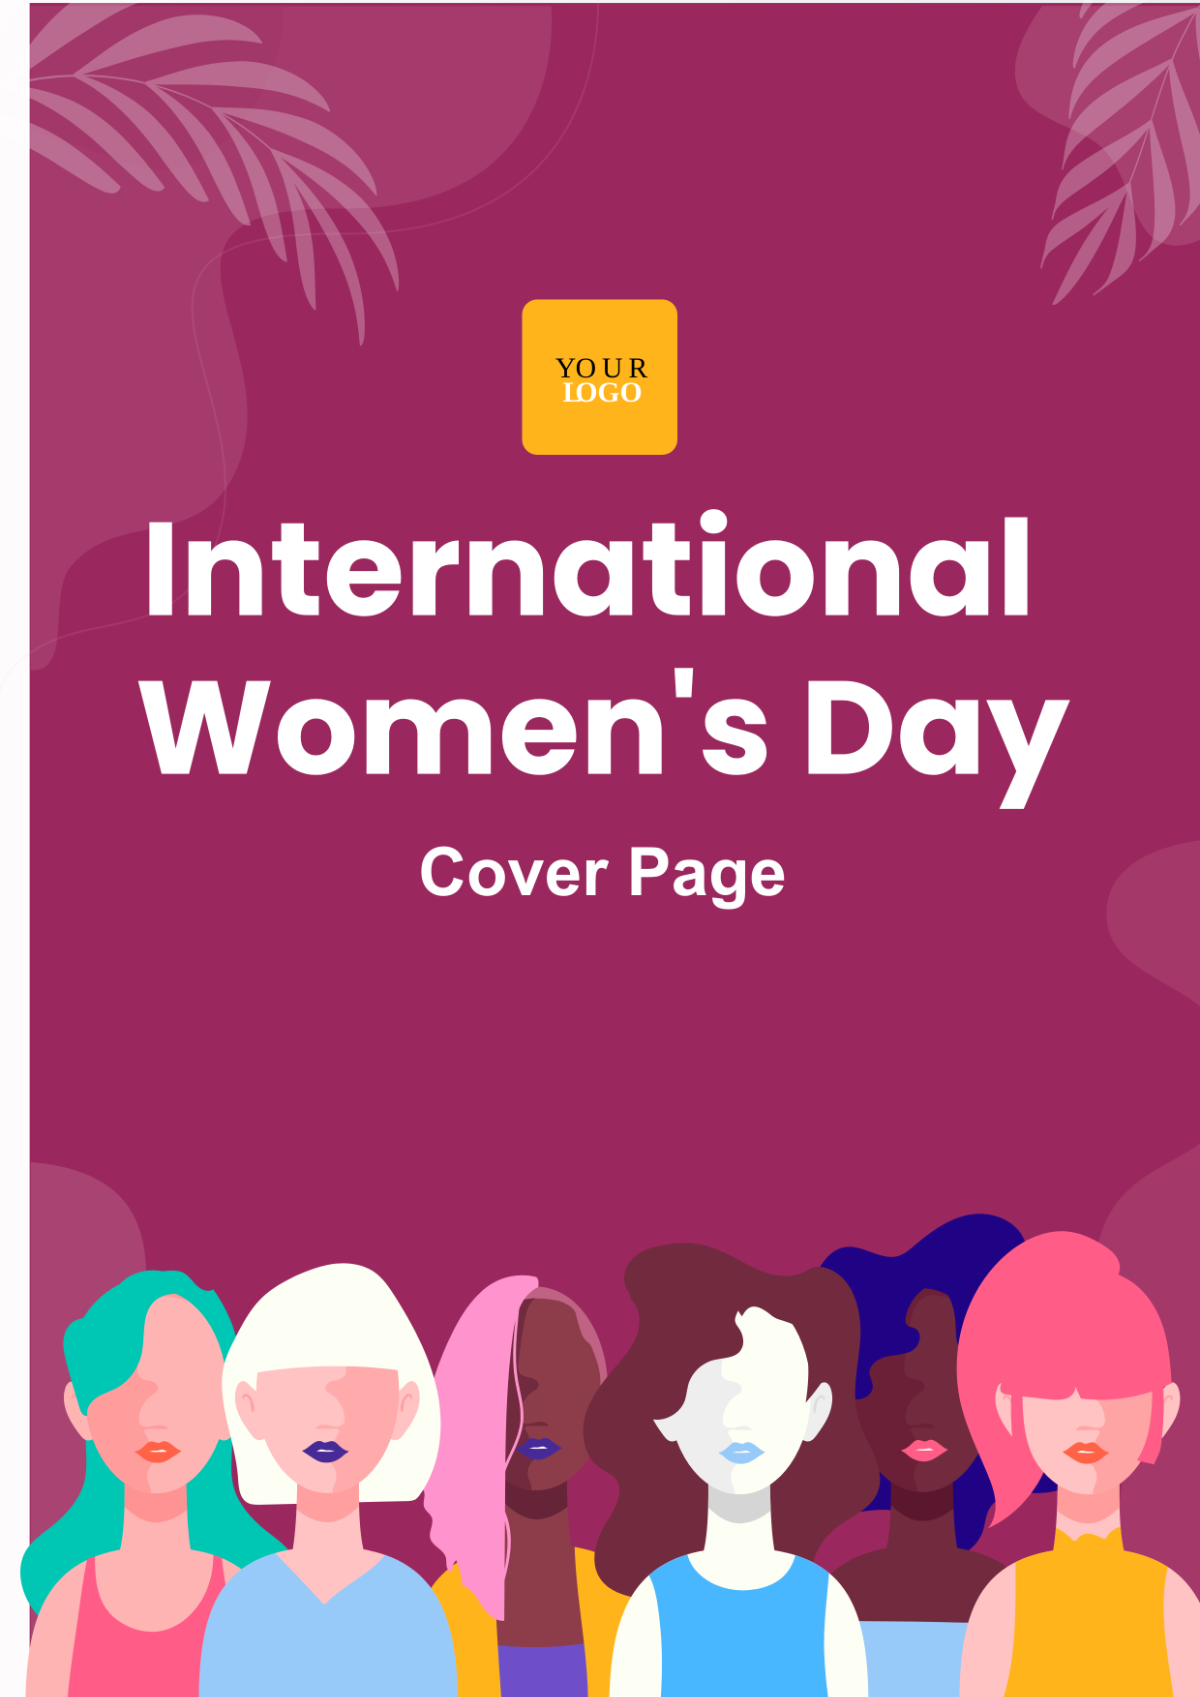 International Women's Day Cover Page